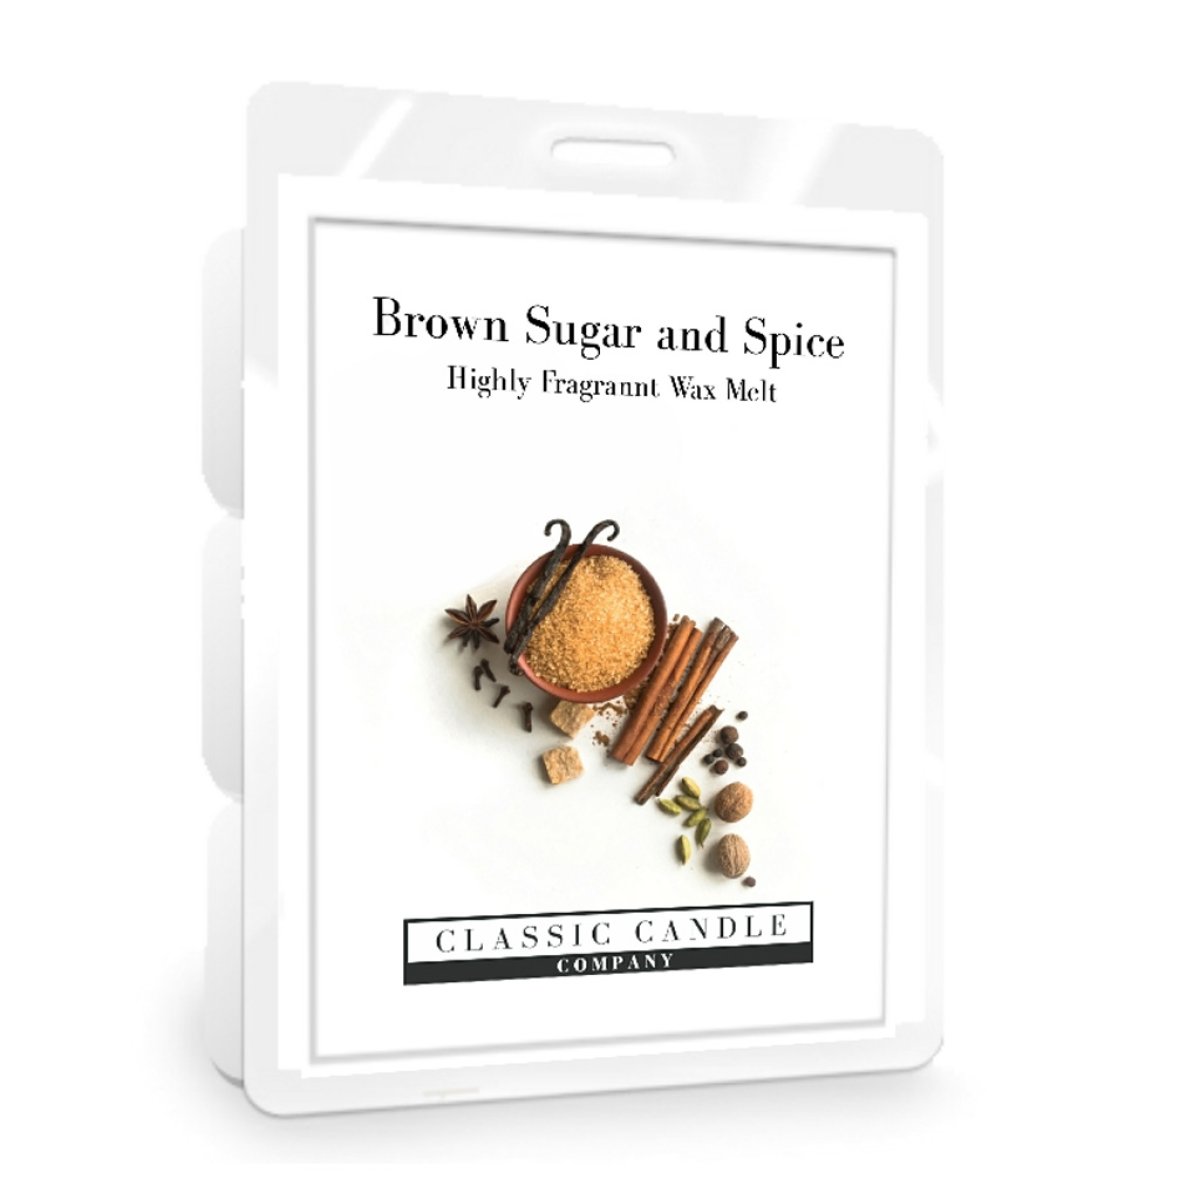 Brown Sugar and Spice